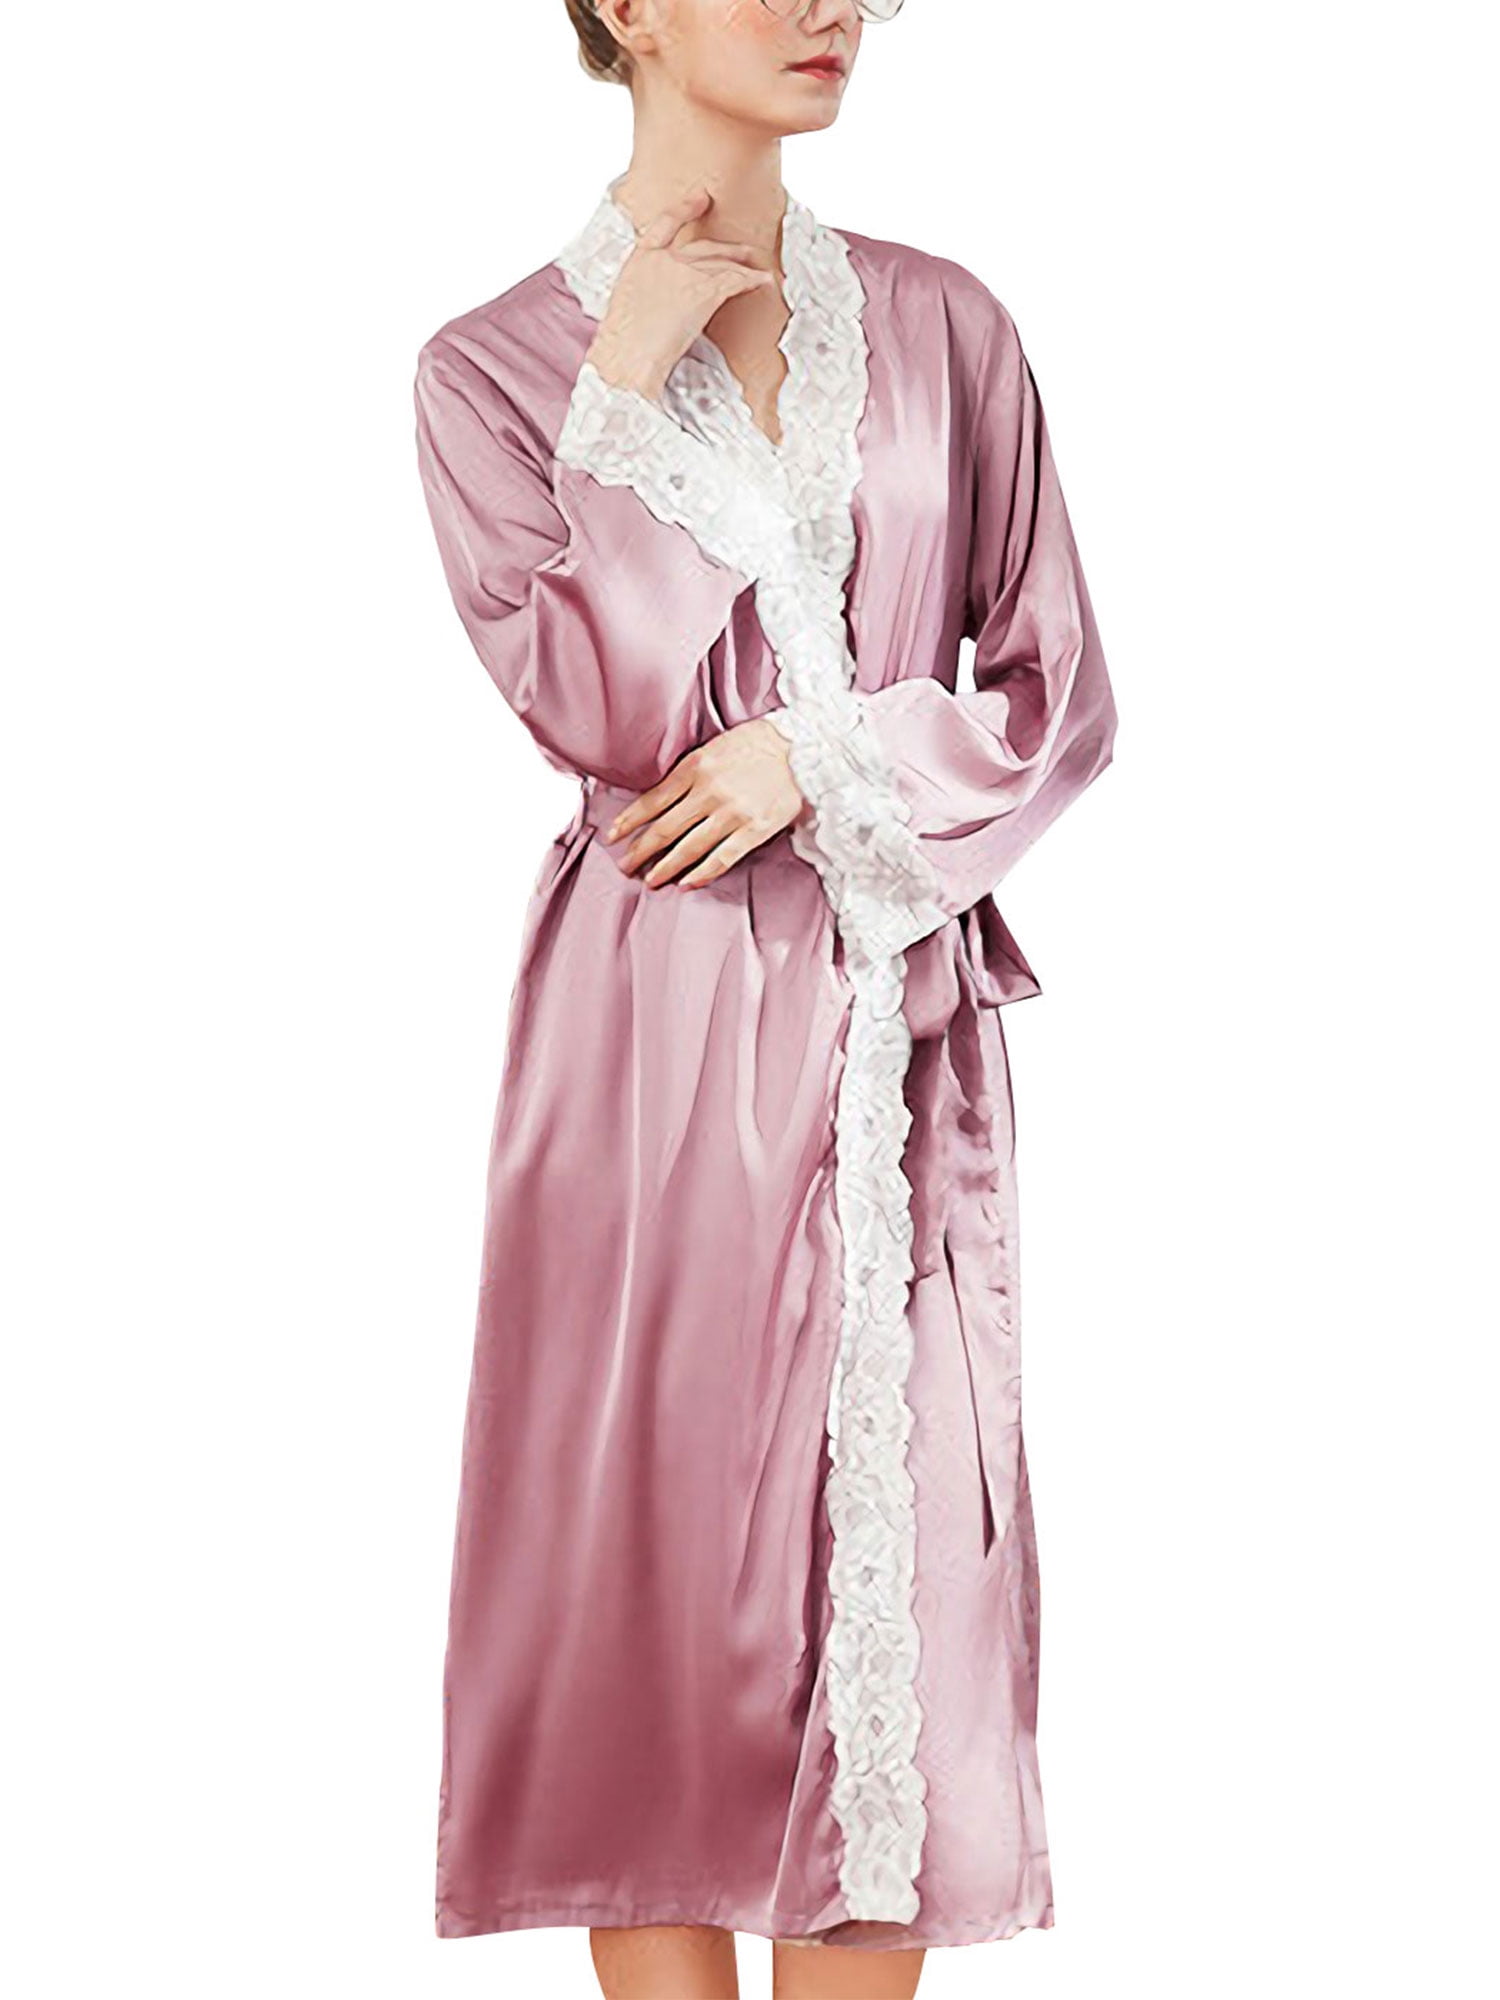 Womens Satin Robes Pure Color Long Kimono Bathrobes Soft Nightgown with Lace Sleeve